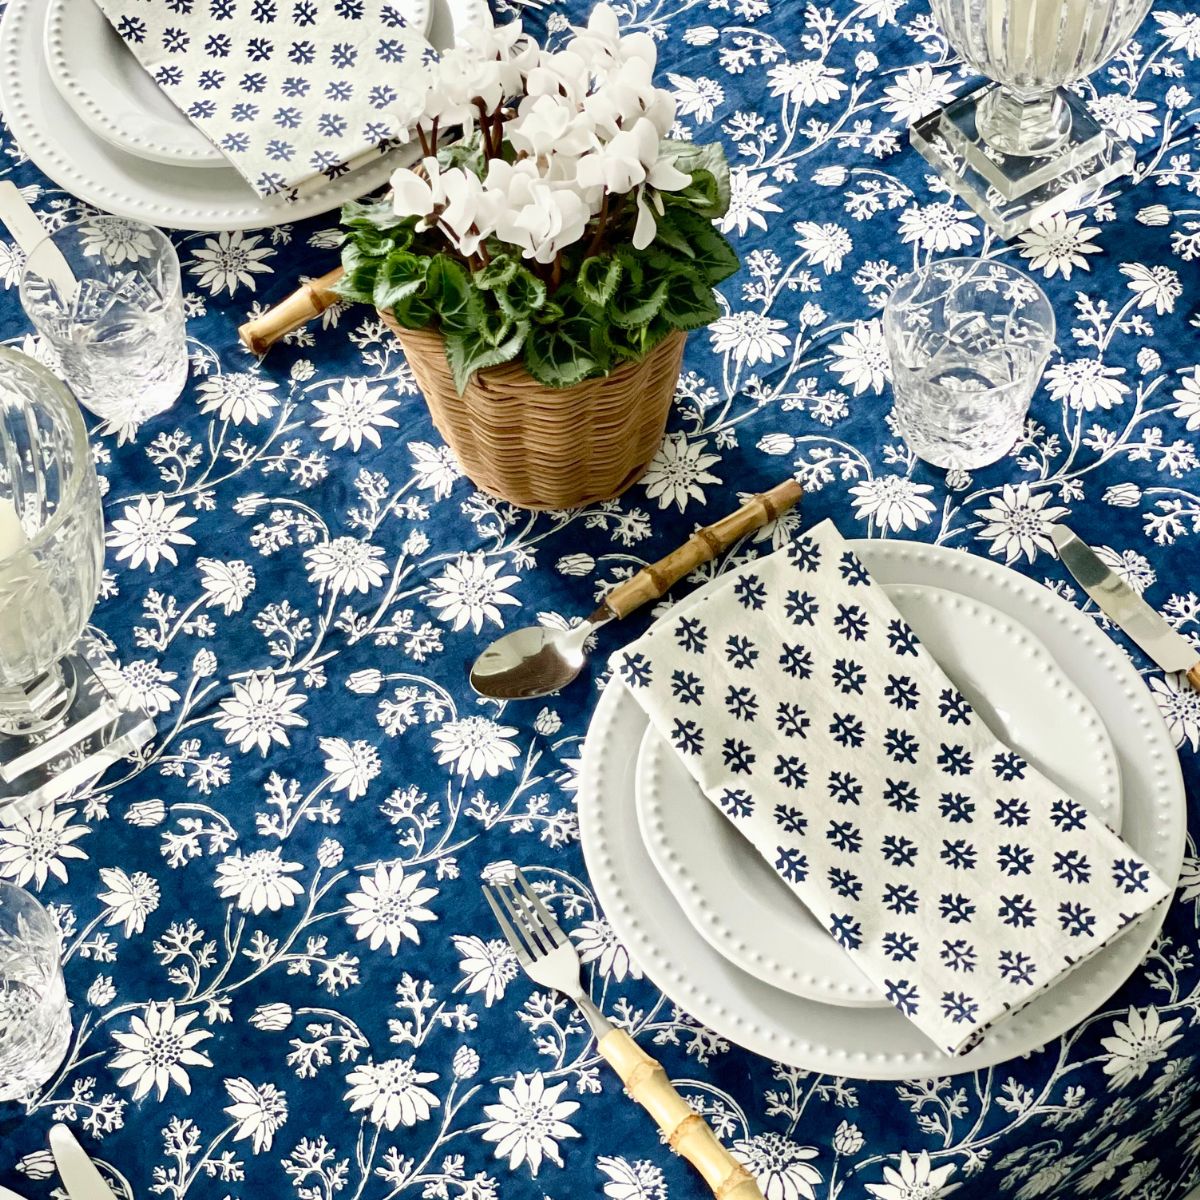 Flannel flower navy blue tablecloth ©